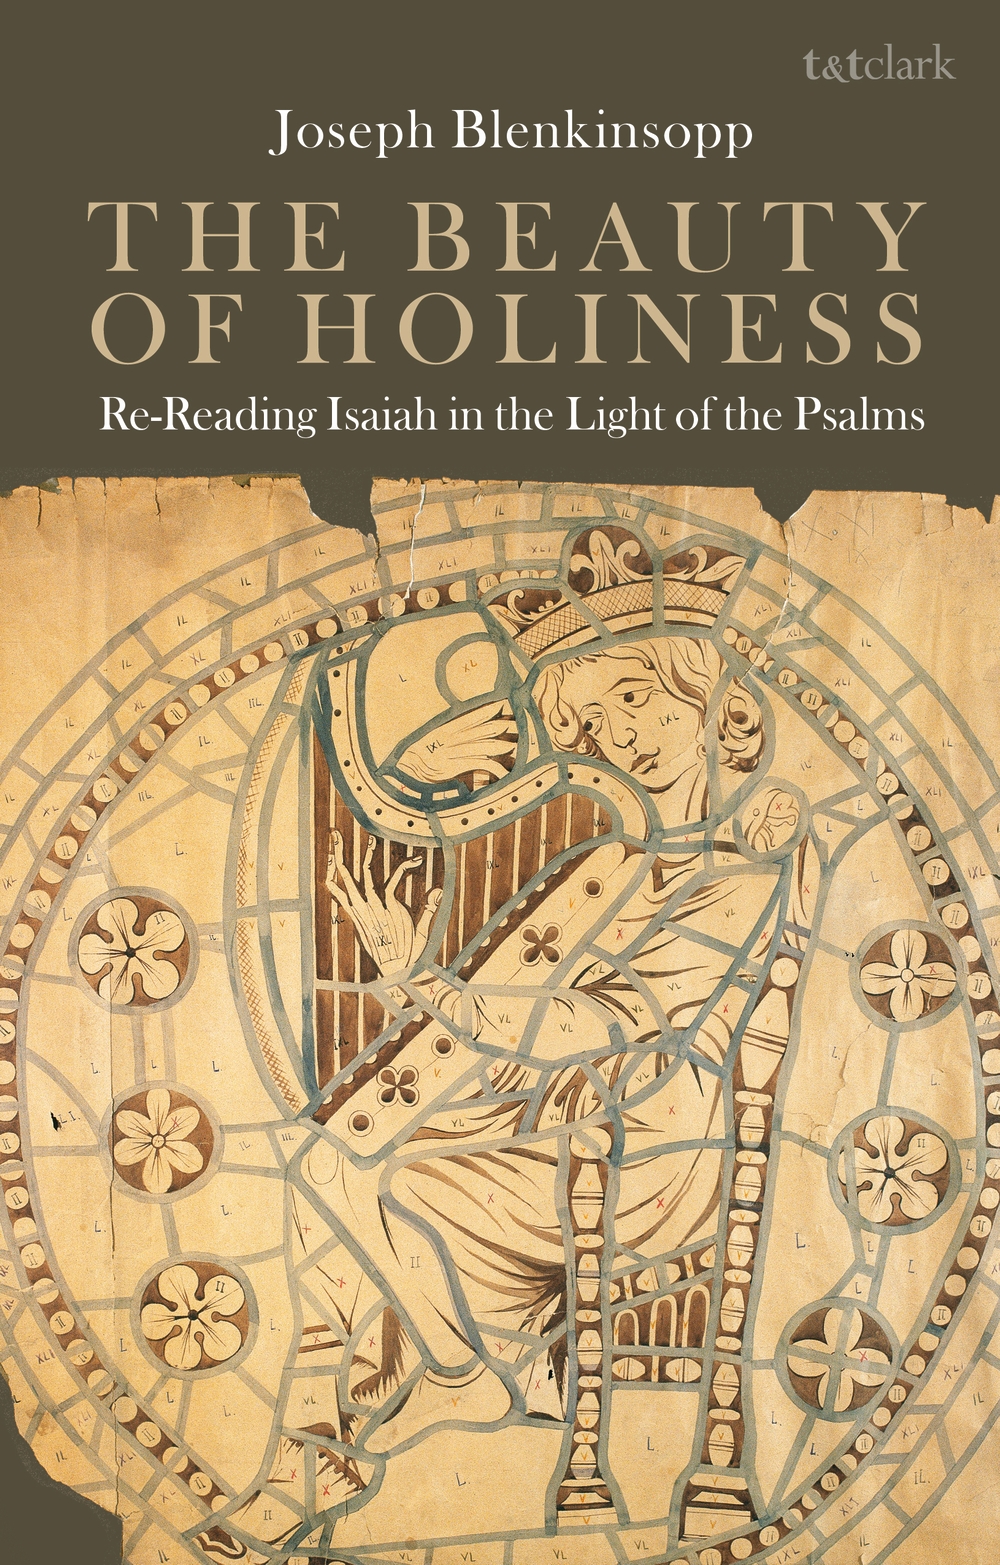 The Beauty of Holiness - 15-24.99